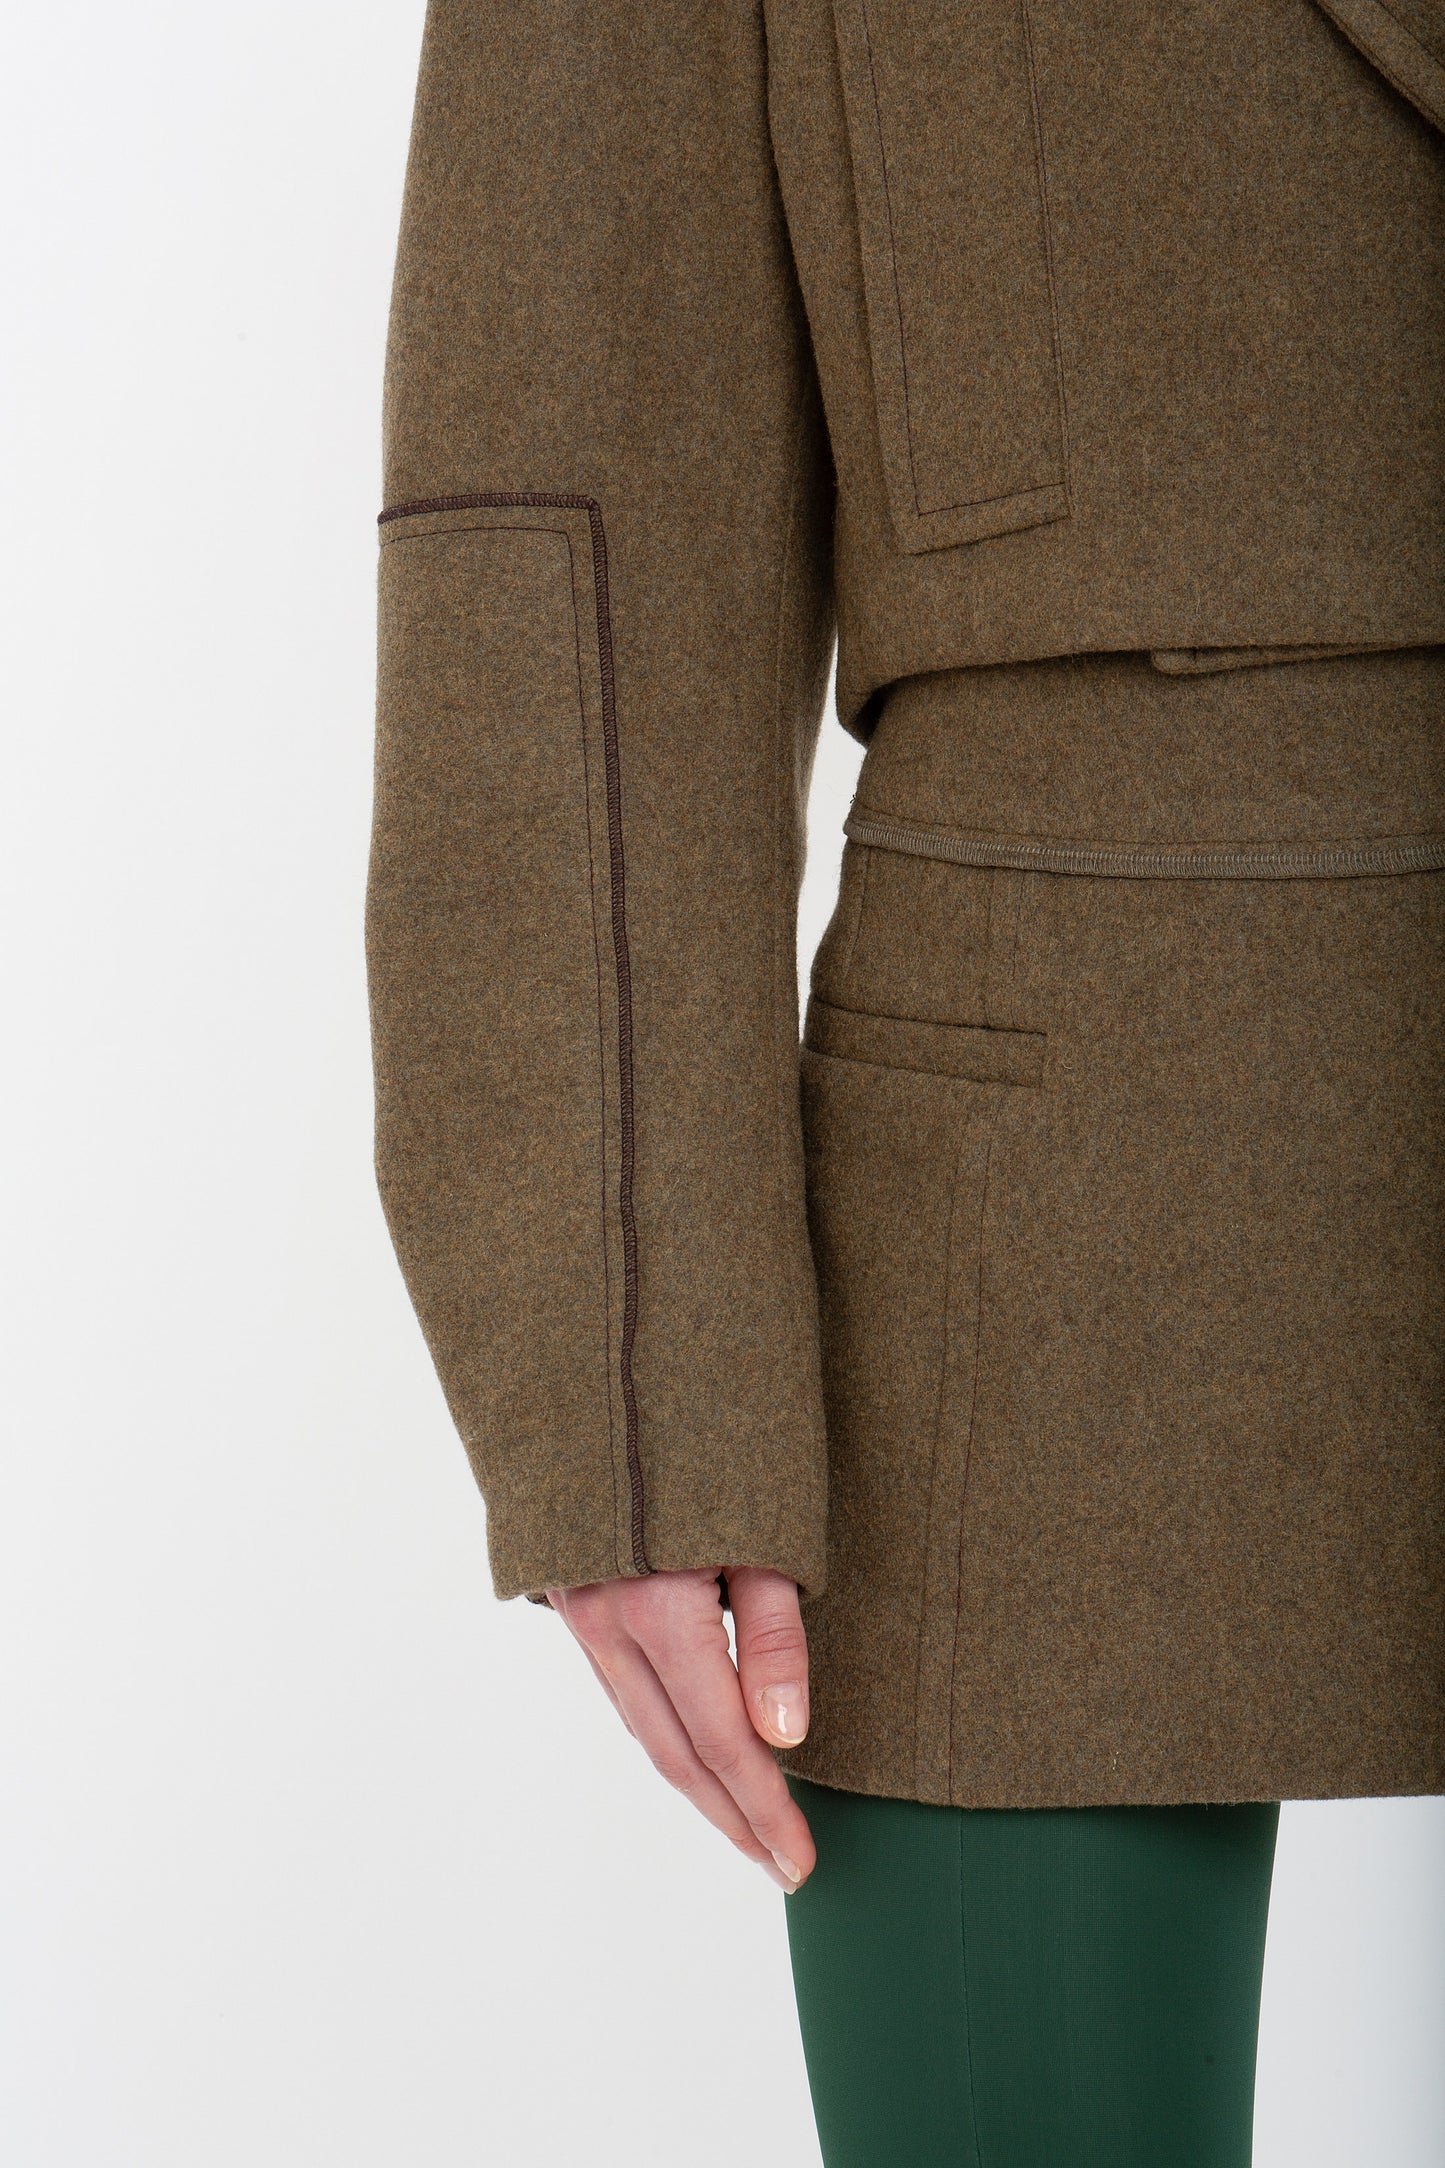 A person wearing a brown Victoria Beckham Cropped Pea Coat In Khaki and green khaki pants stands against a white background. Only the lower half of the jacket and one hand are visible.